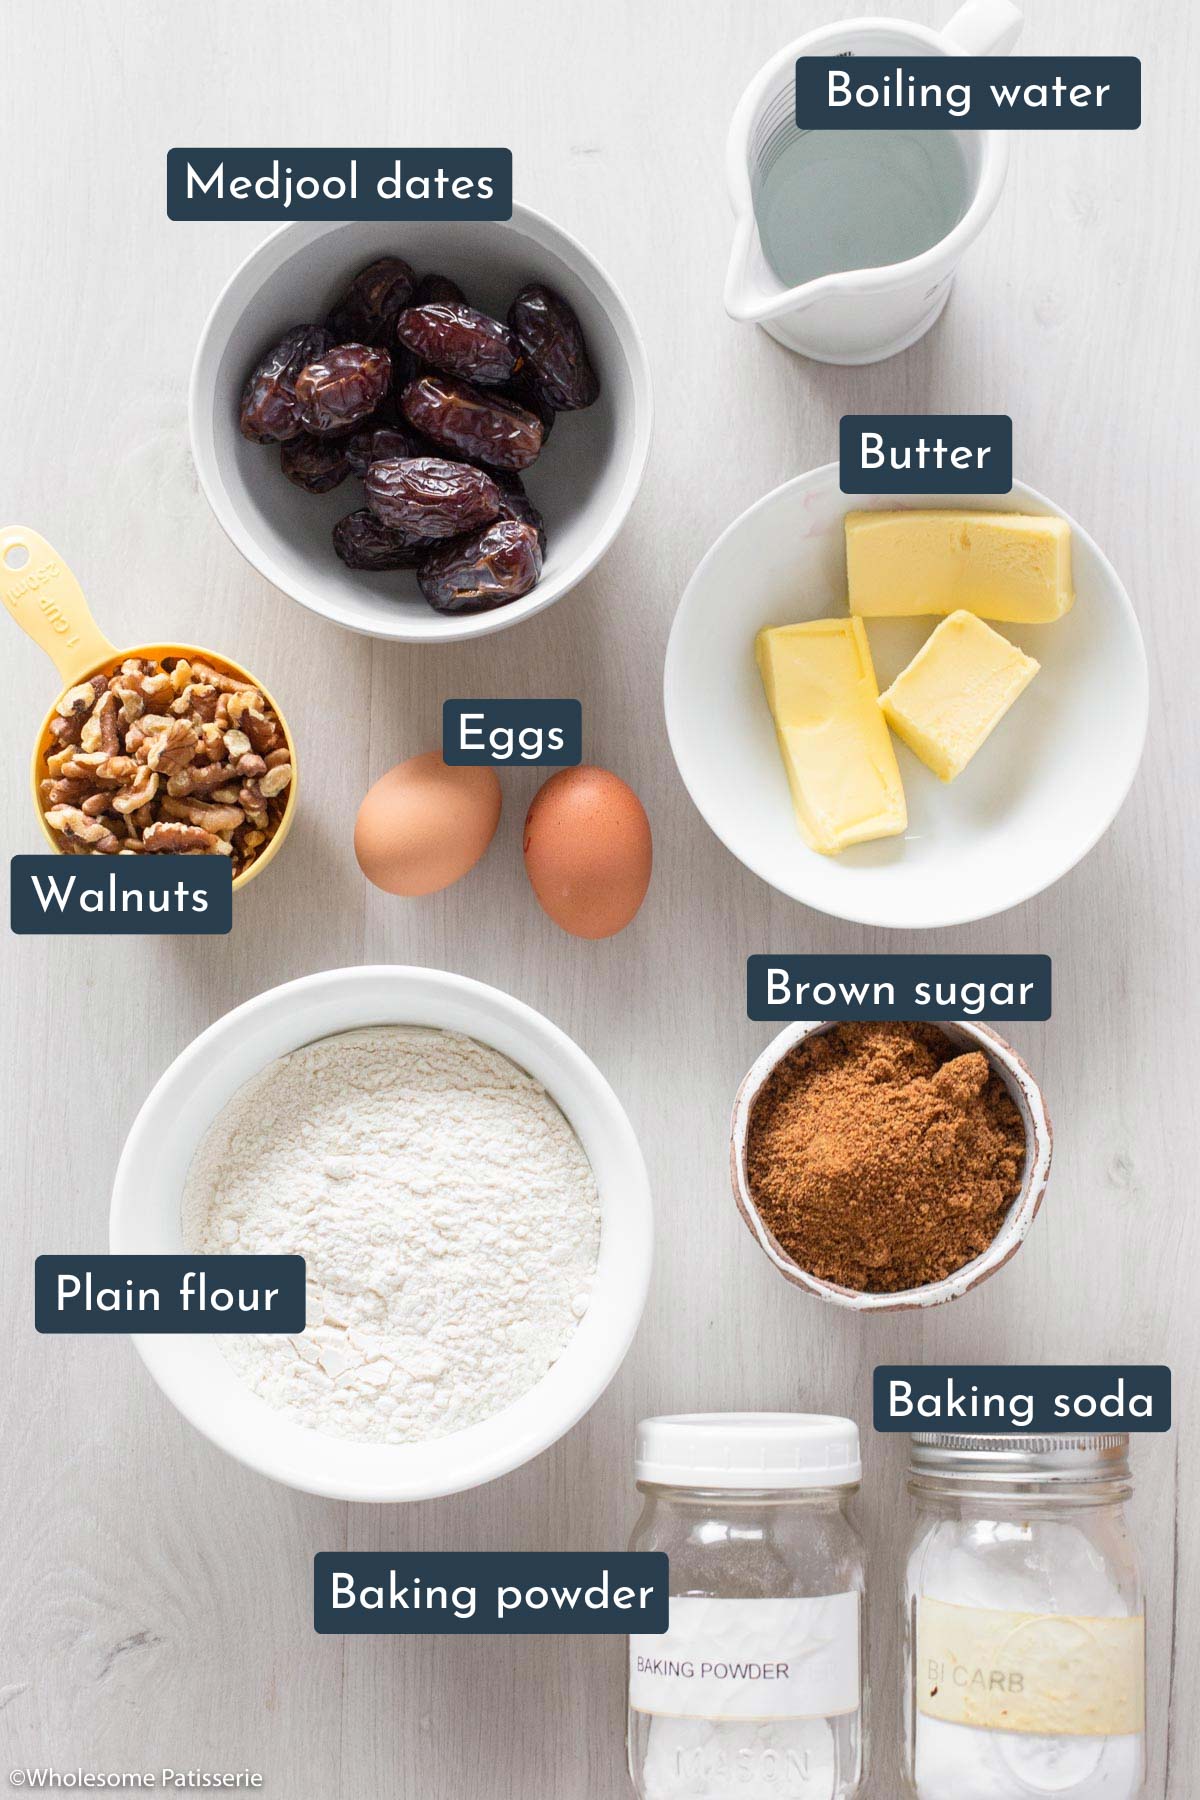 The individual ingredient laid out showing what you will need to make this recipe.